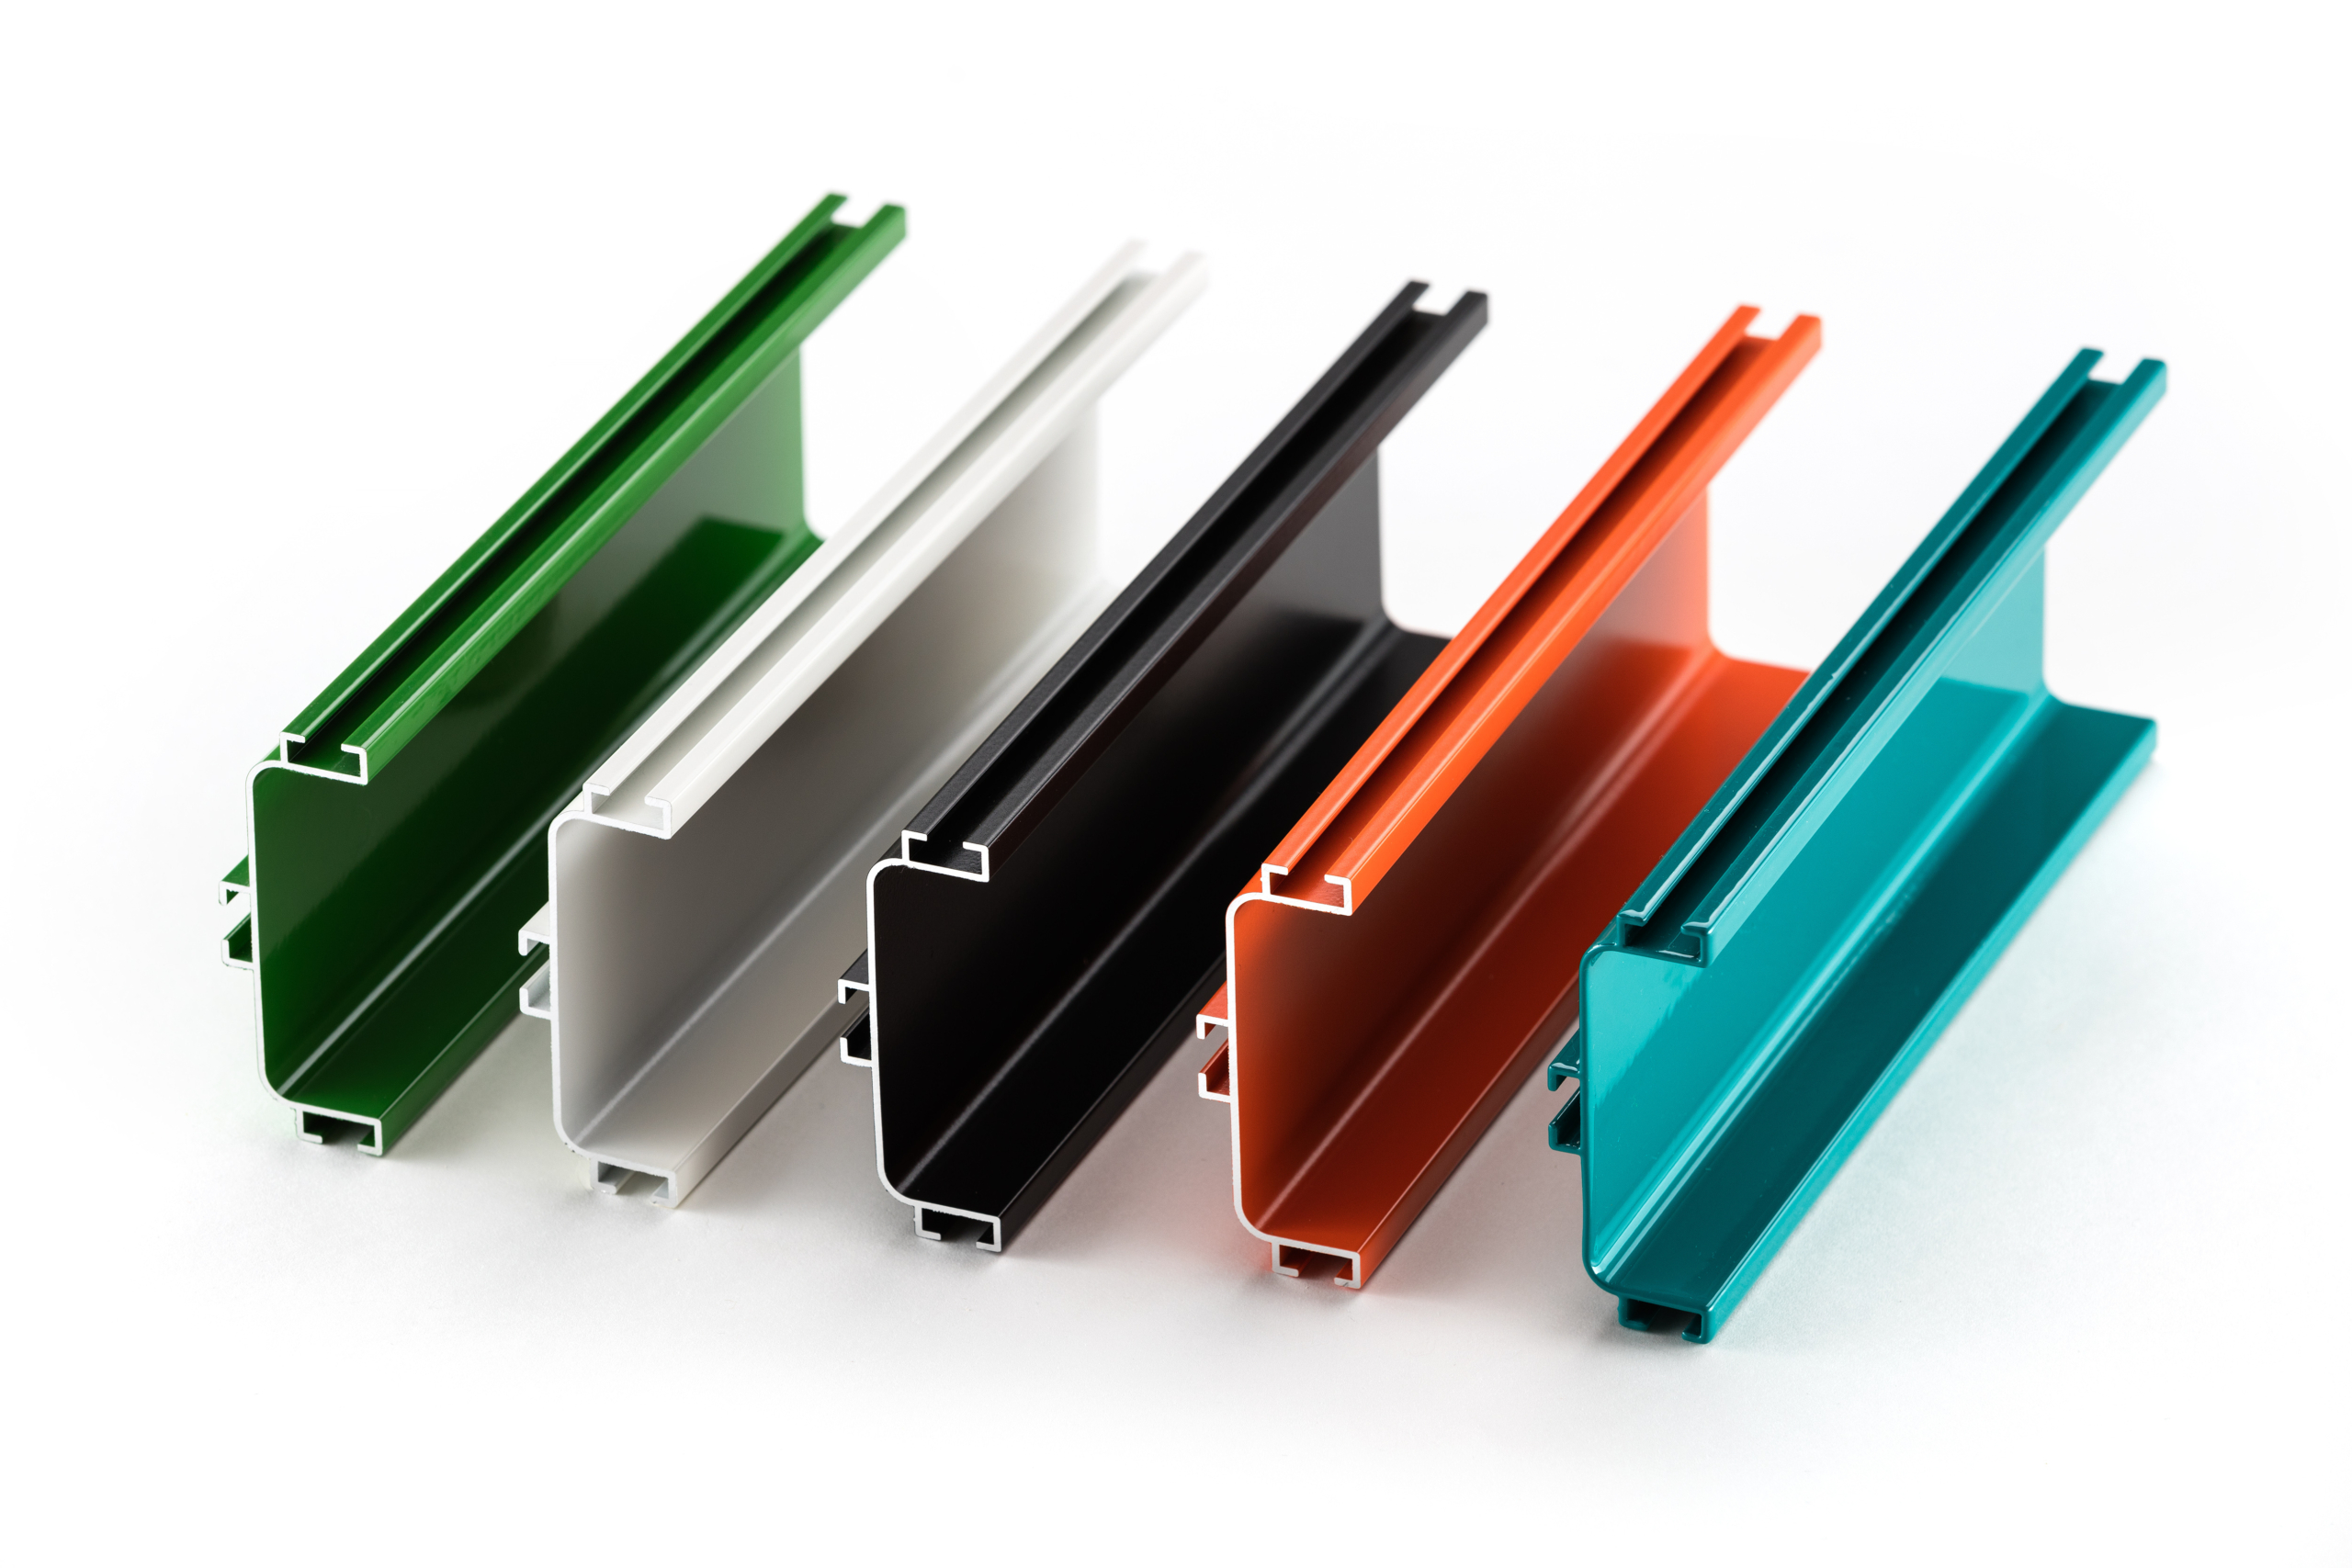 Samples,Of,Colorful,Aluminum,Profiles,Over,White,Background